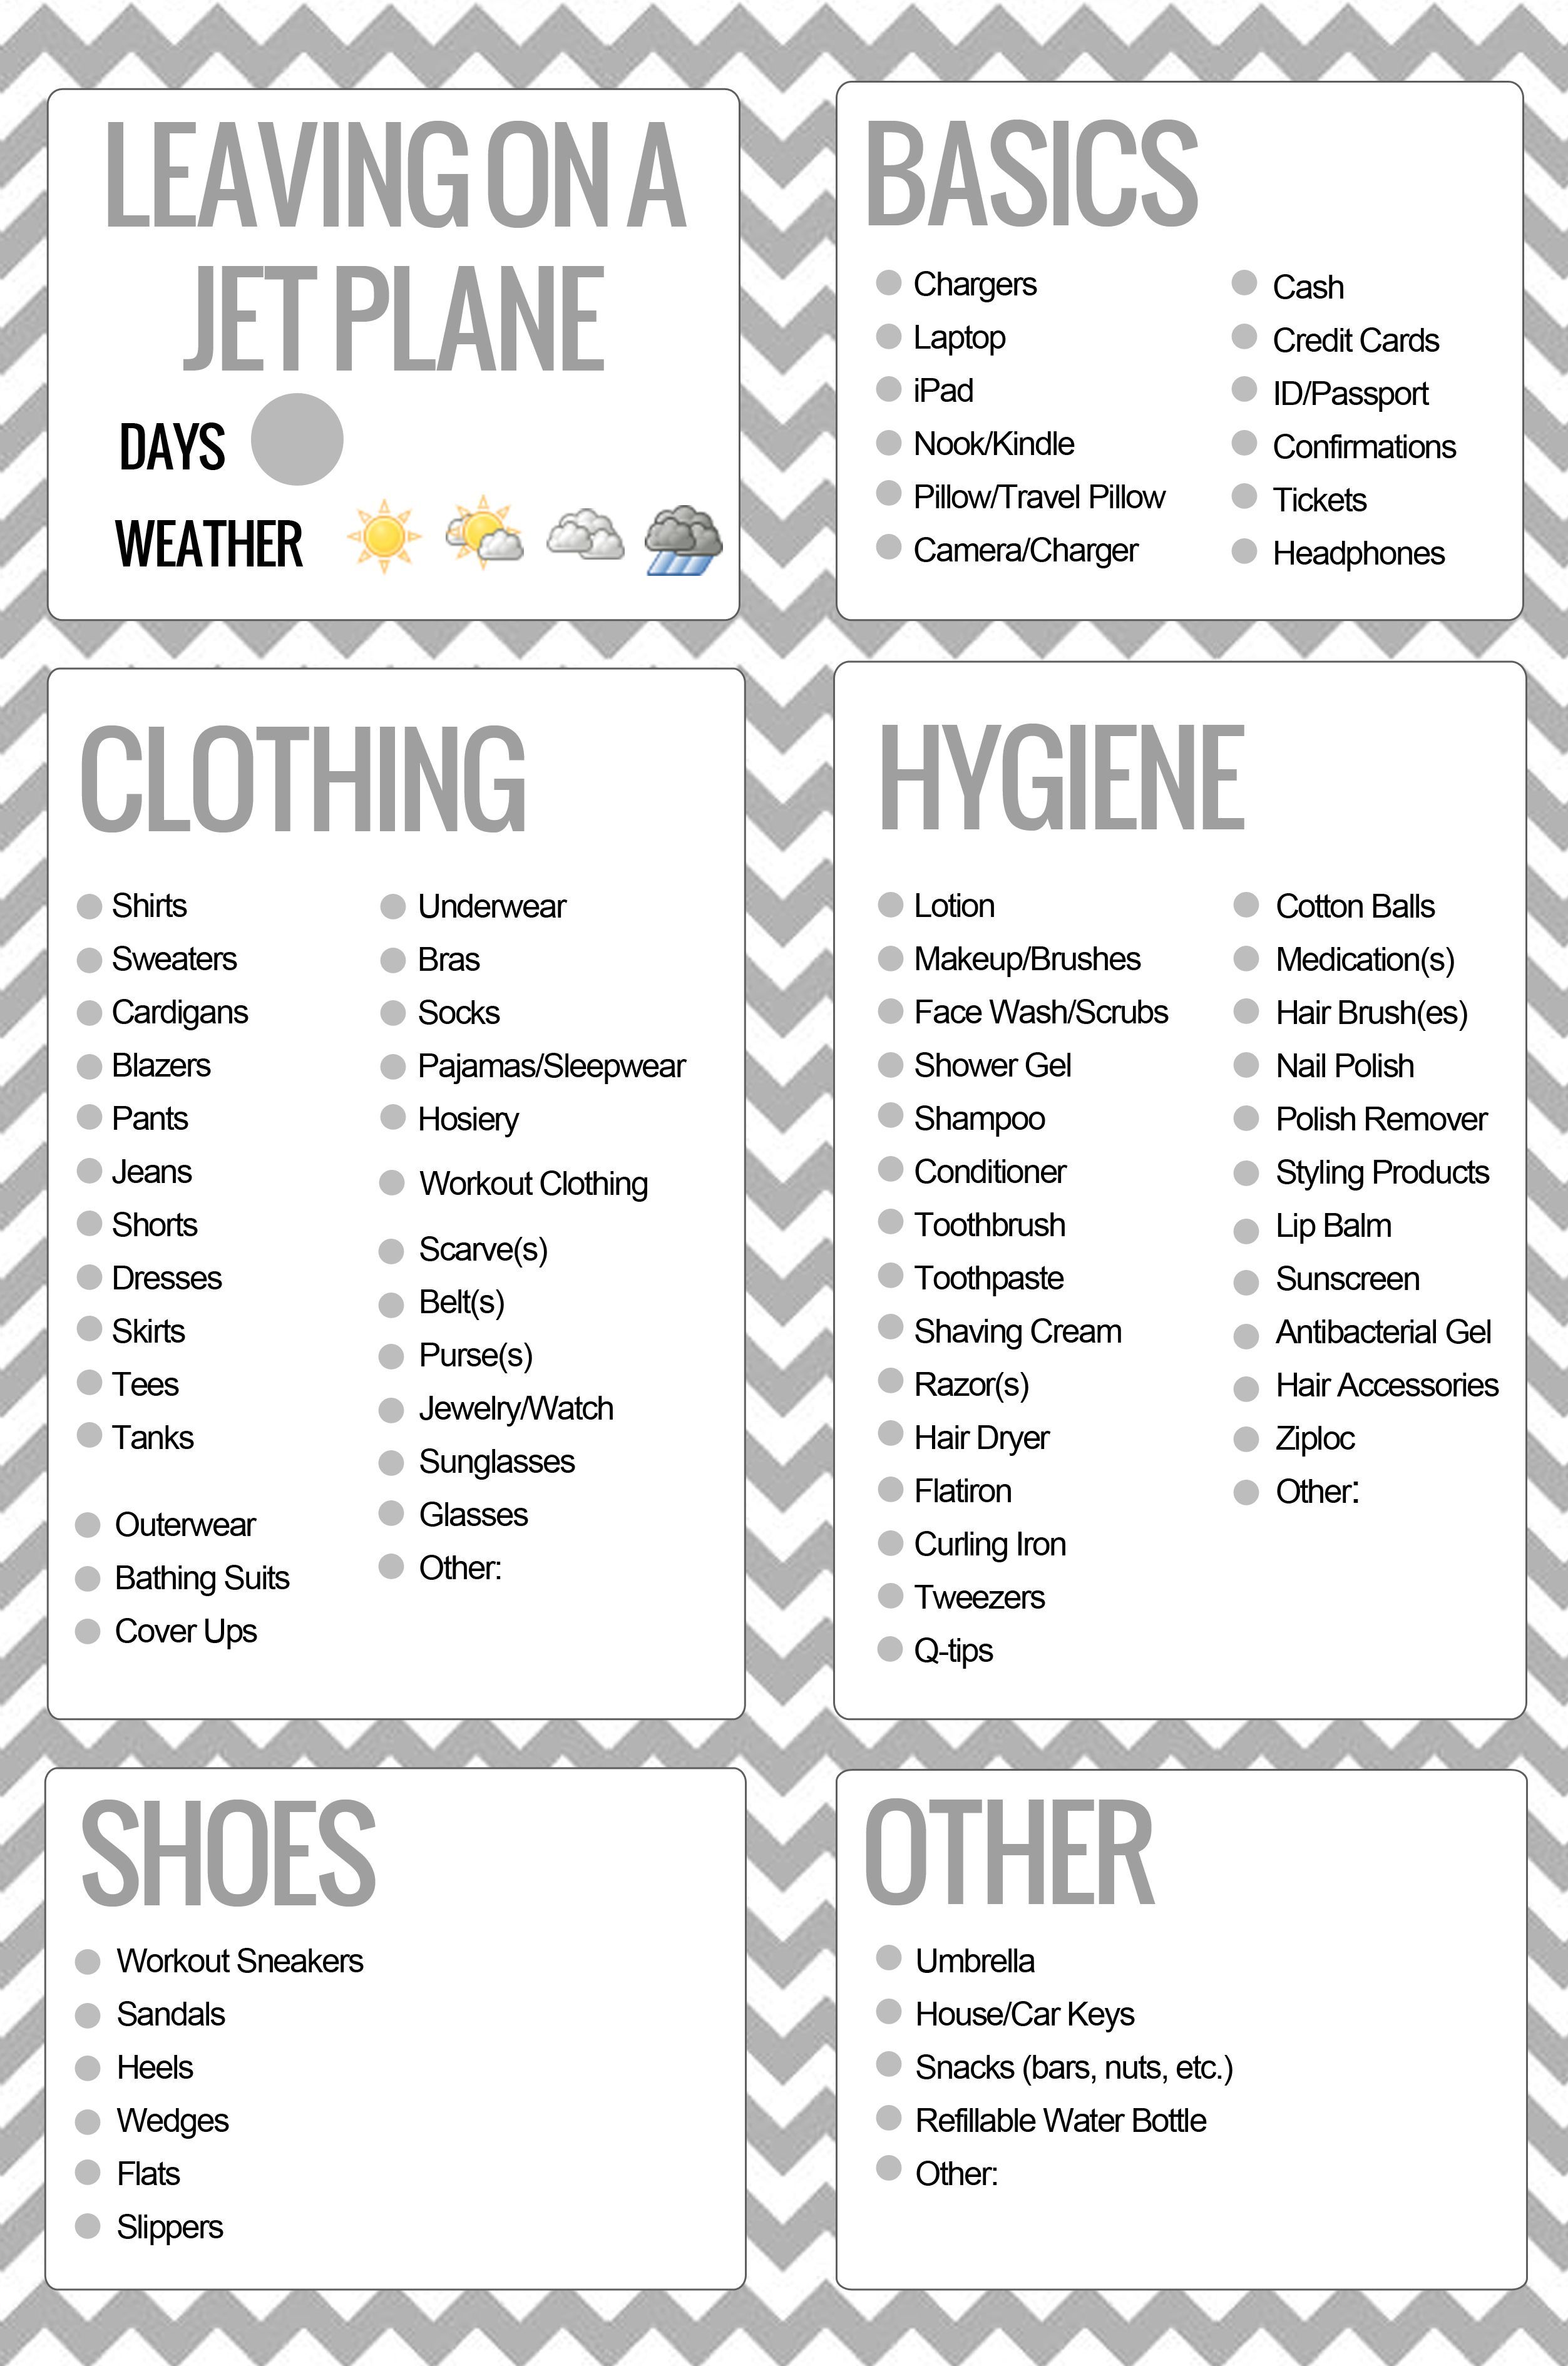 This is such a great little travel/packing list from PinQue blog.  StyleLife: Tr